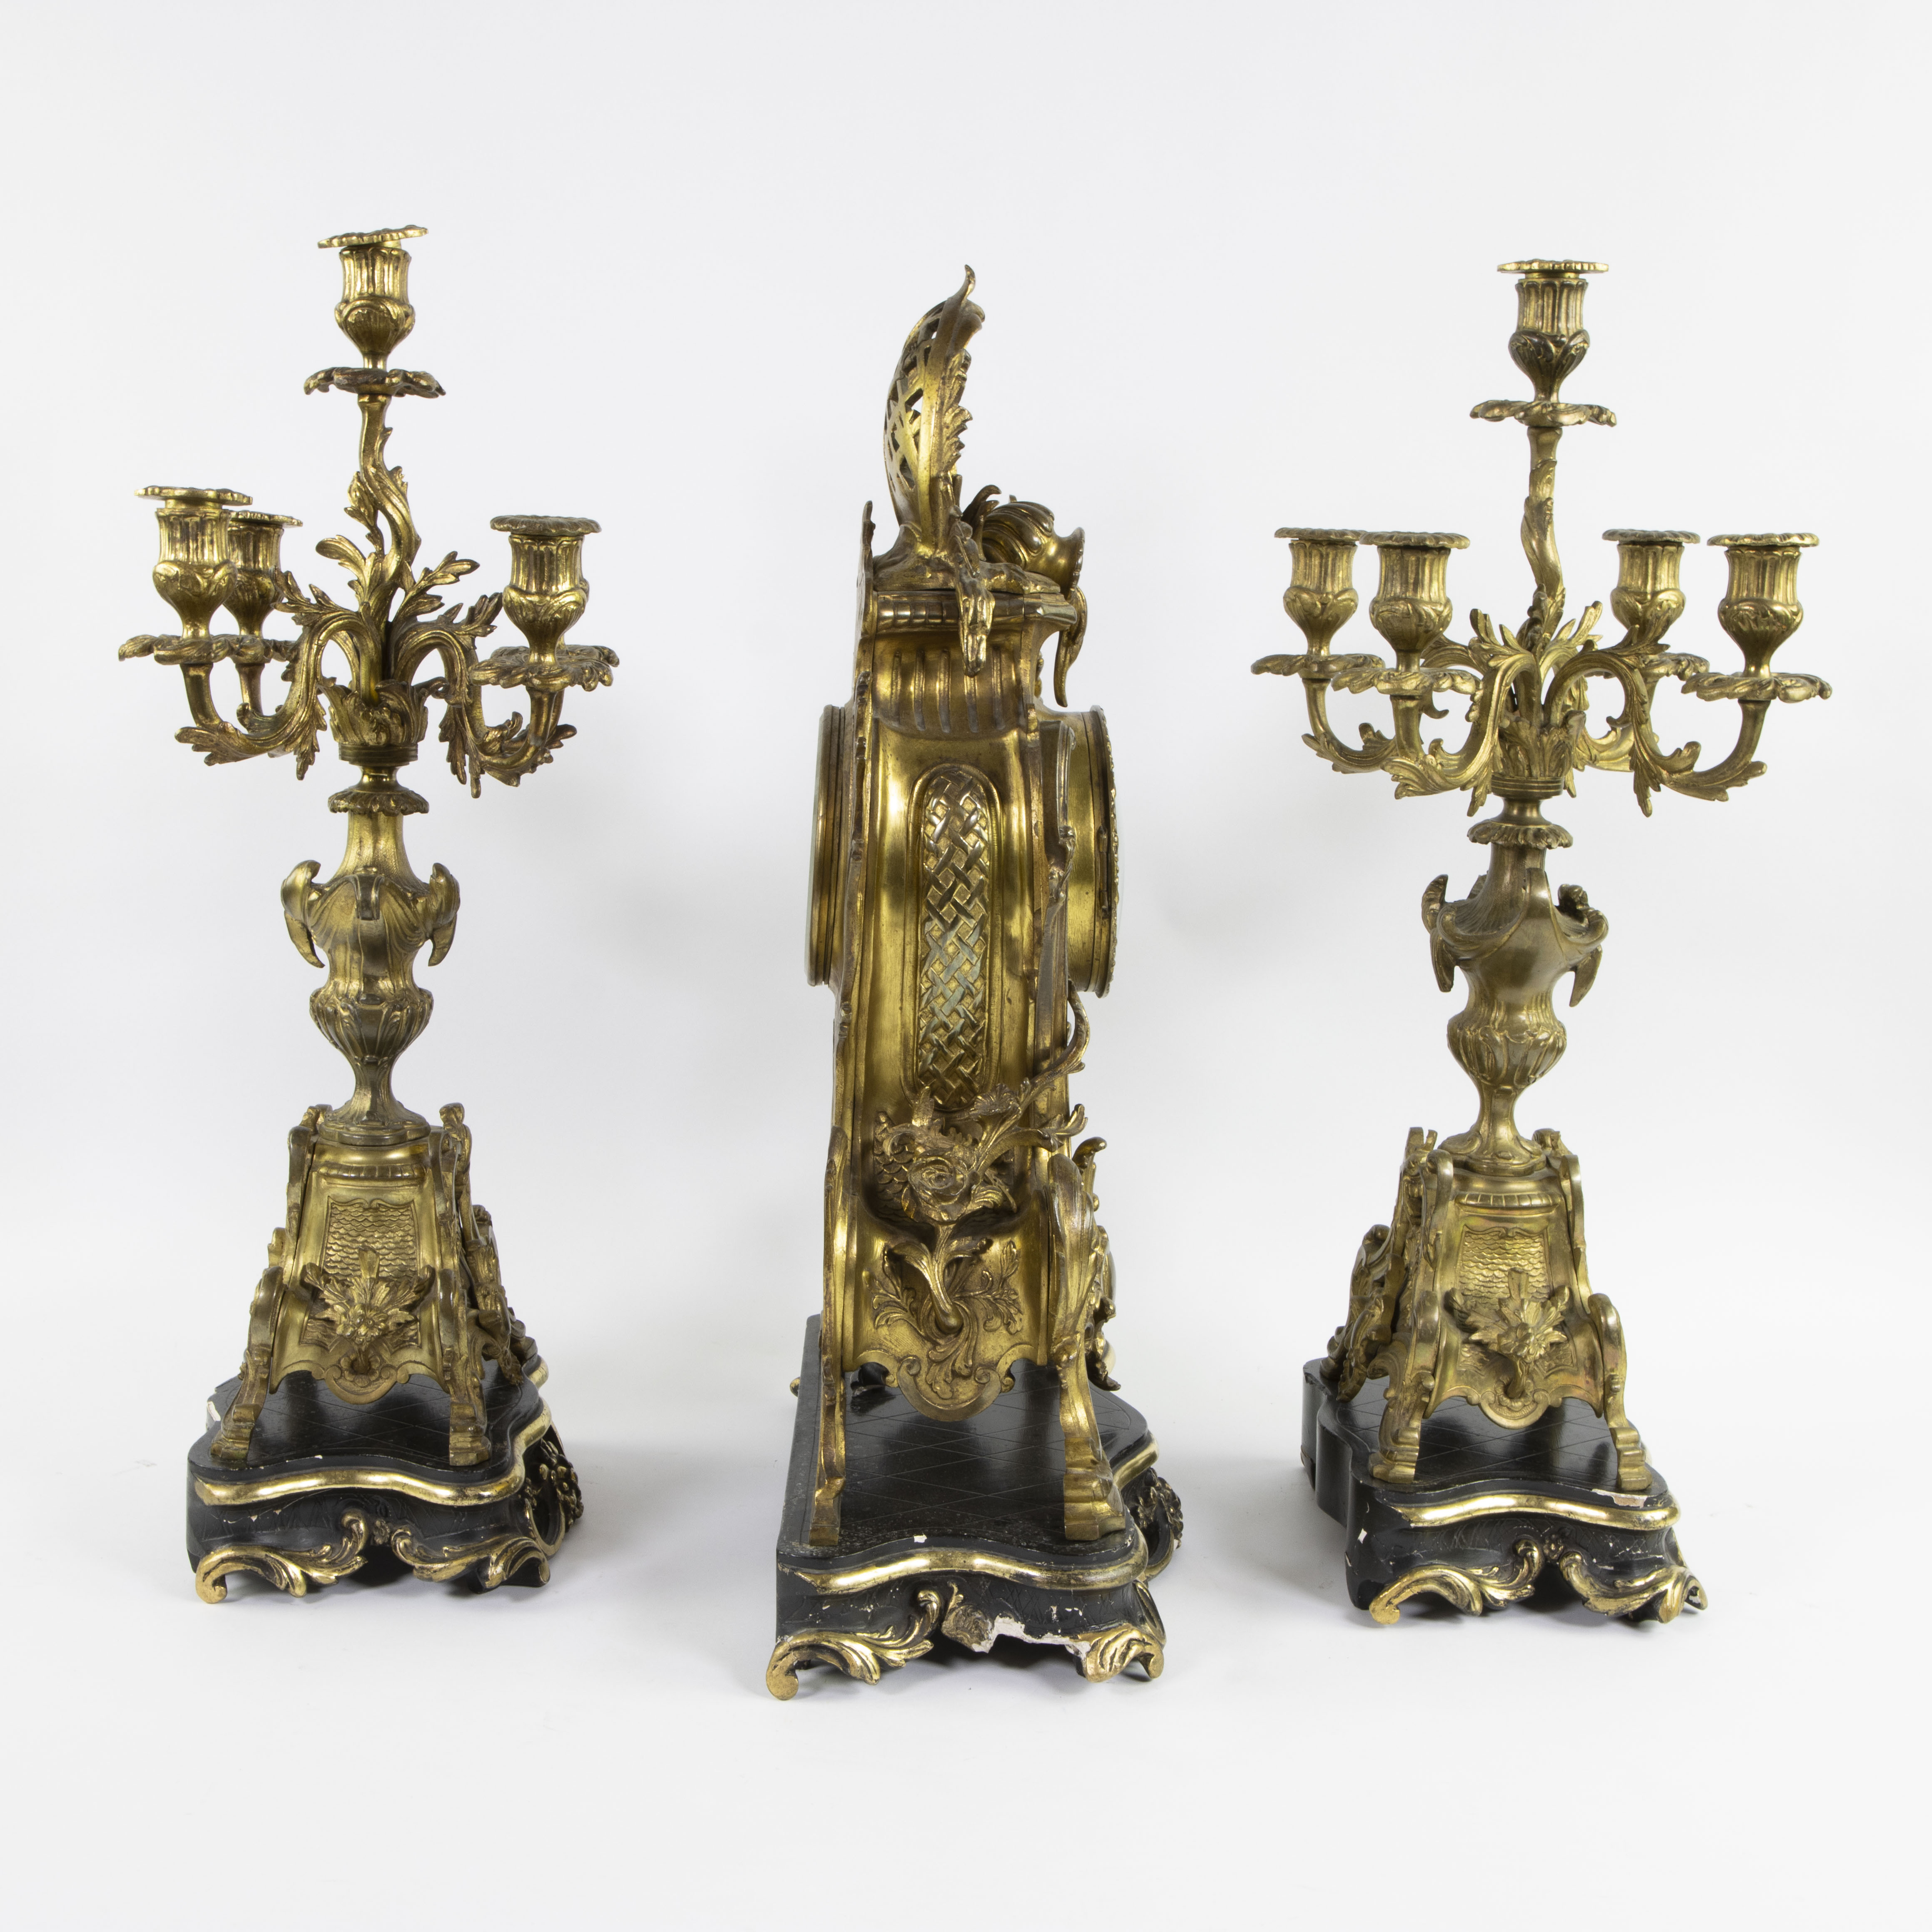 A three-part Louis XV style gilt bronze mantel clock garniture consisting of a clock and candlestick - Image 4 of 4